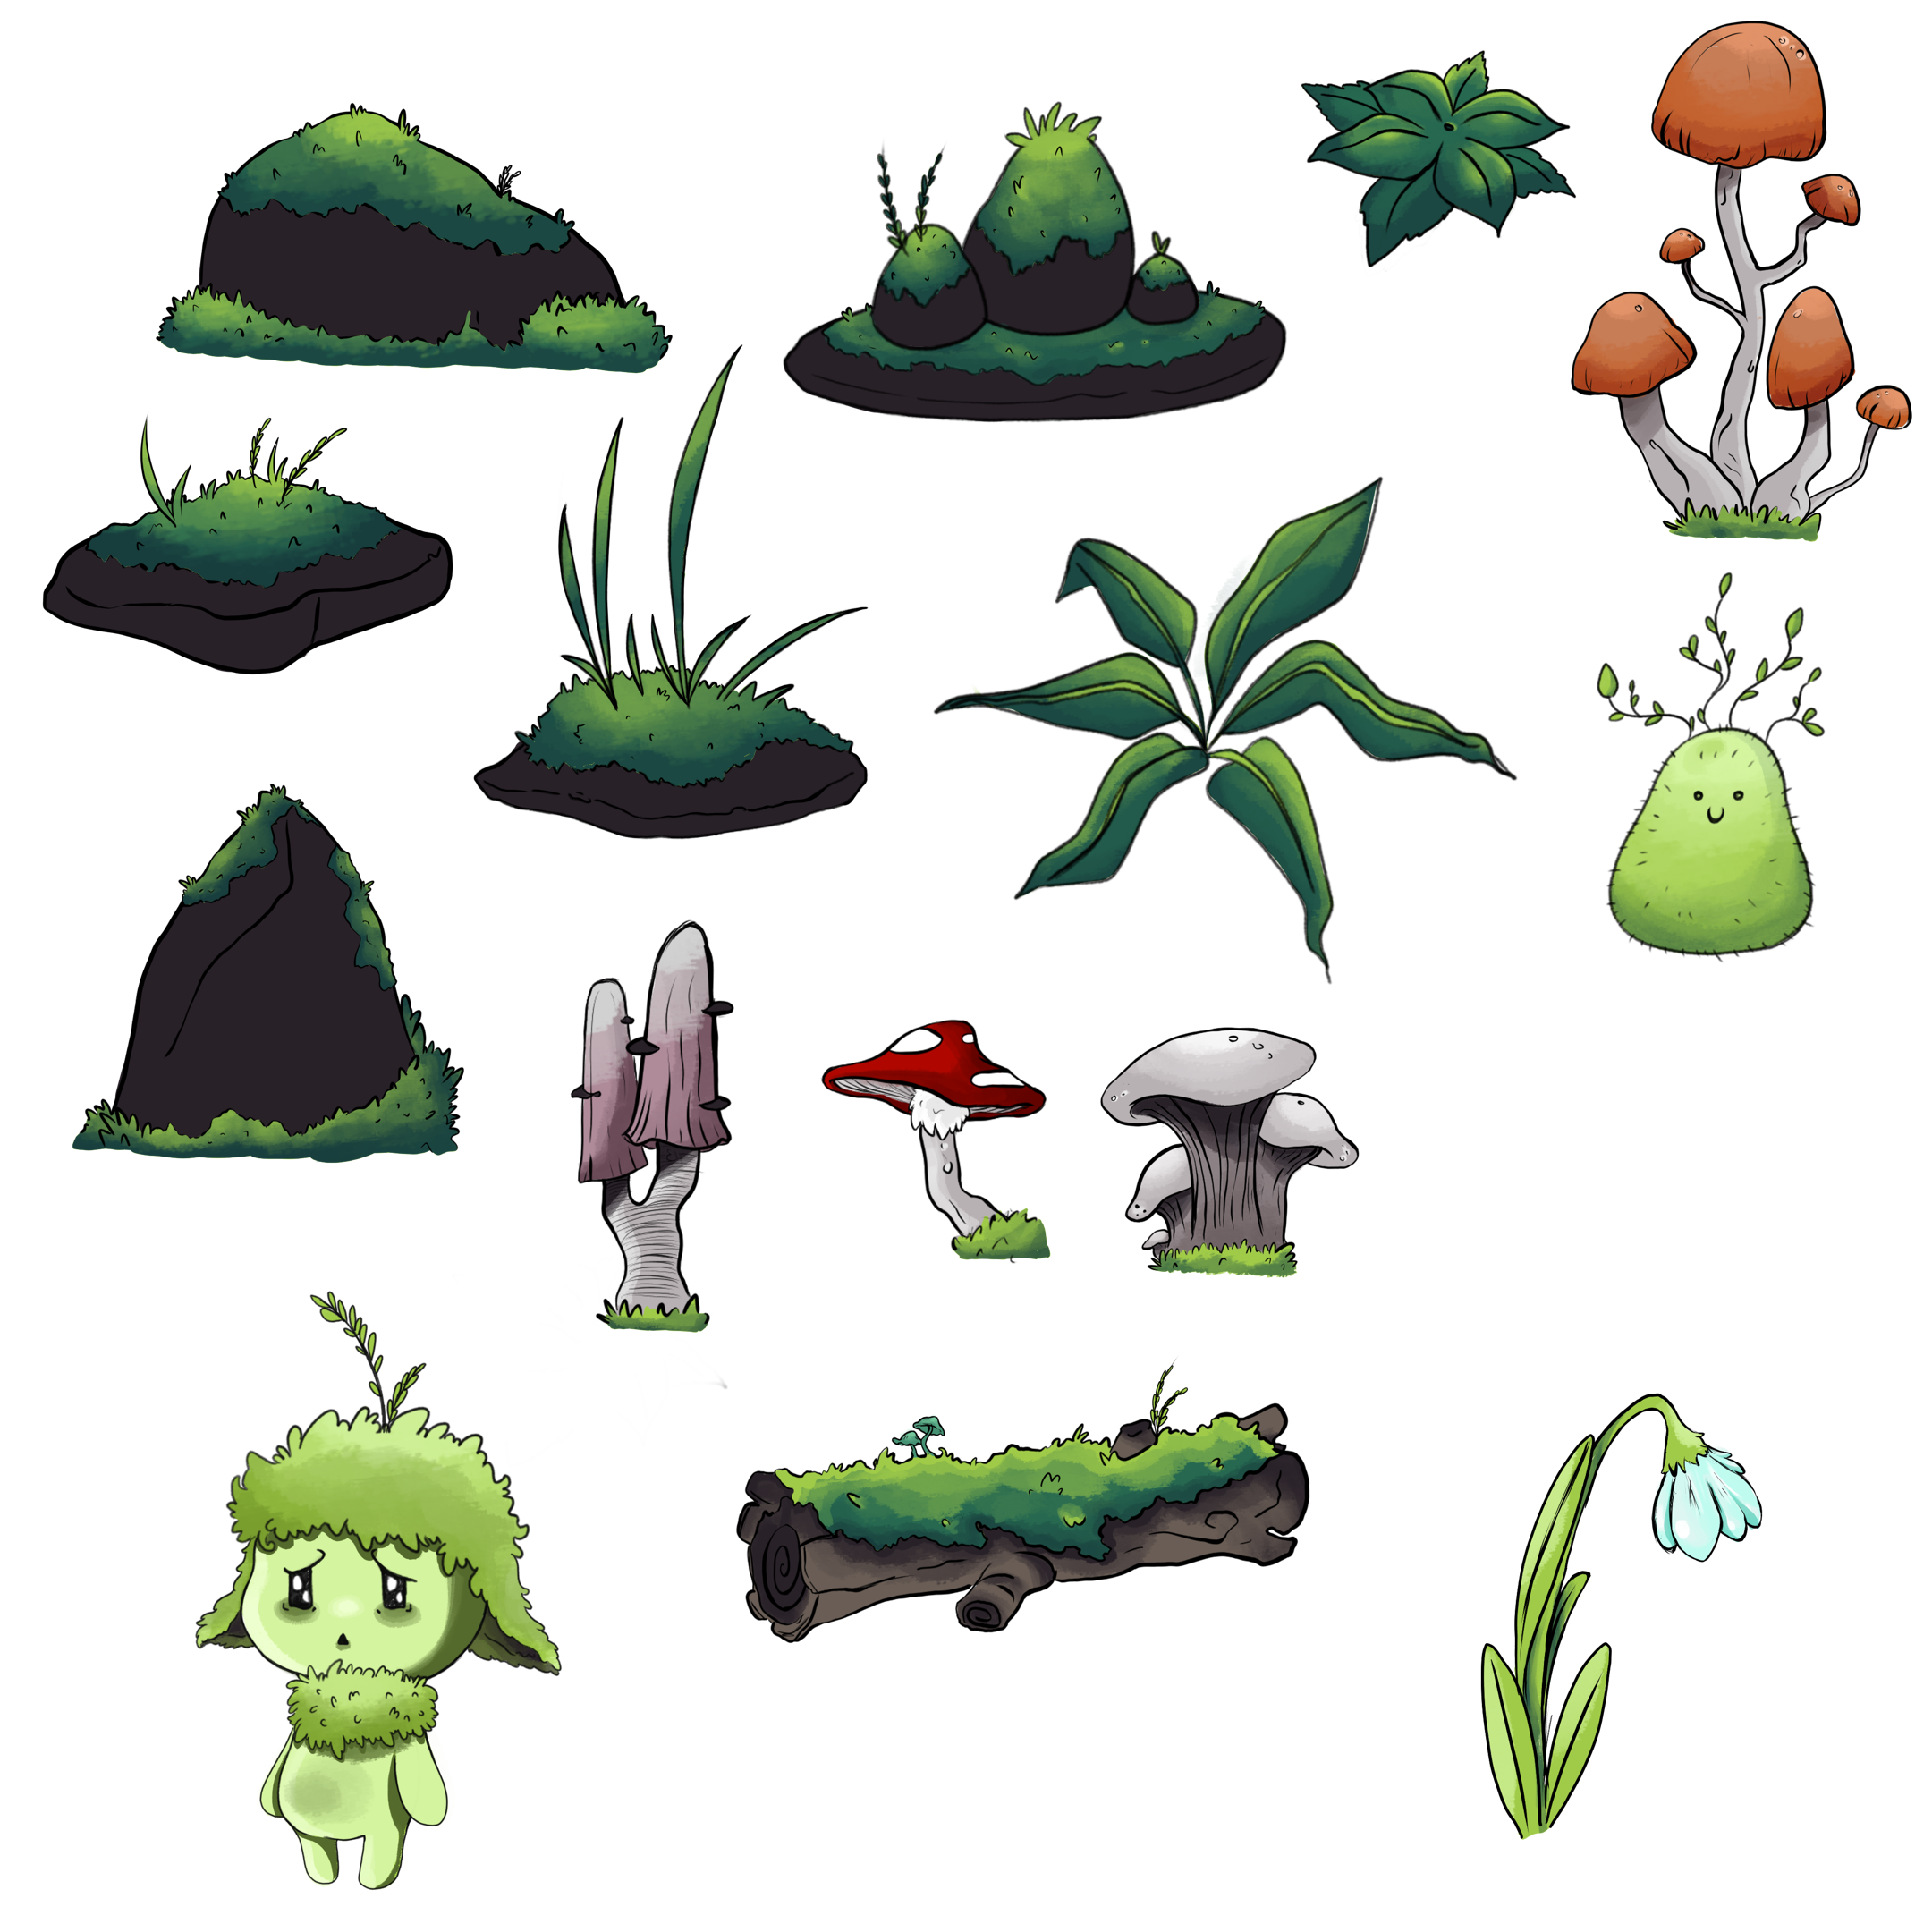 Some assets